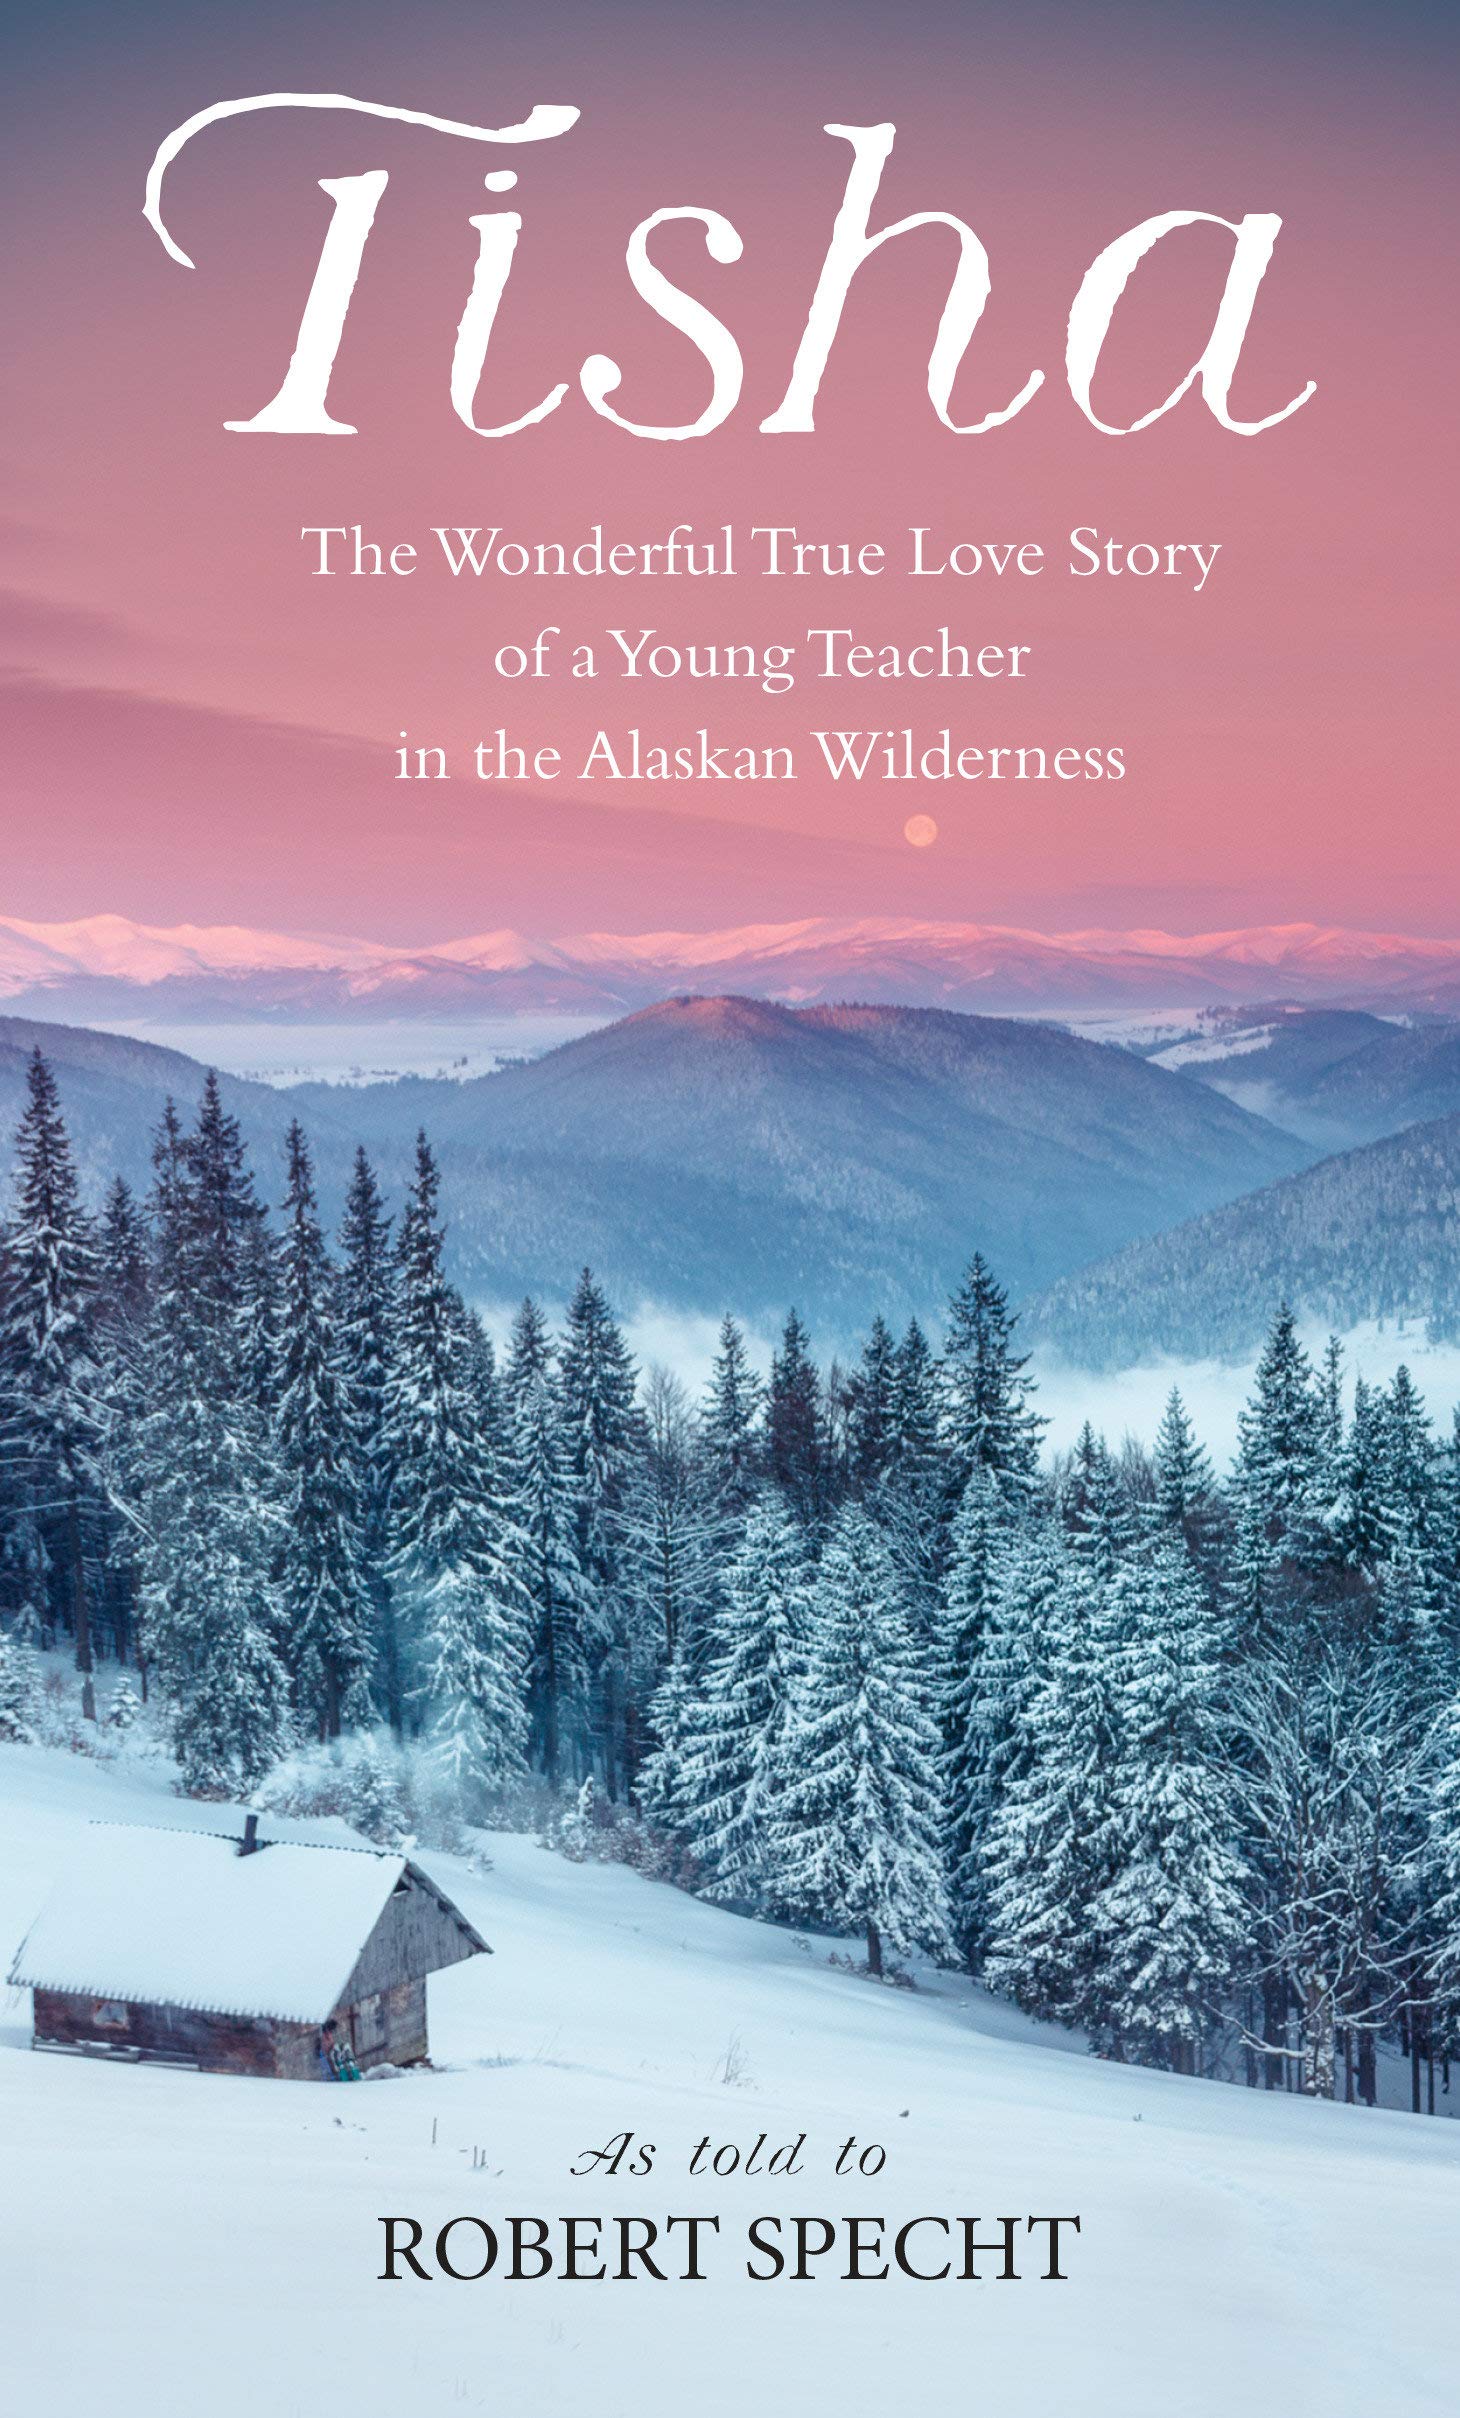 Tisha: The Story of a Young Teacher in the Alaskan Wilderness – as told to Robert Specht